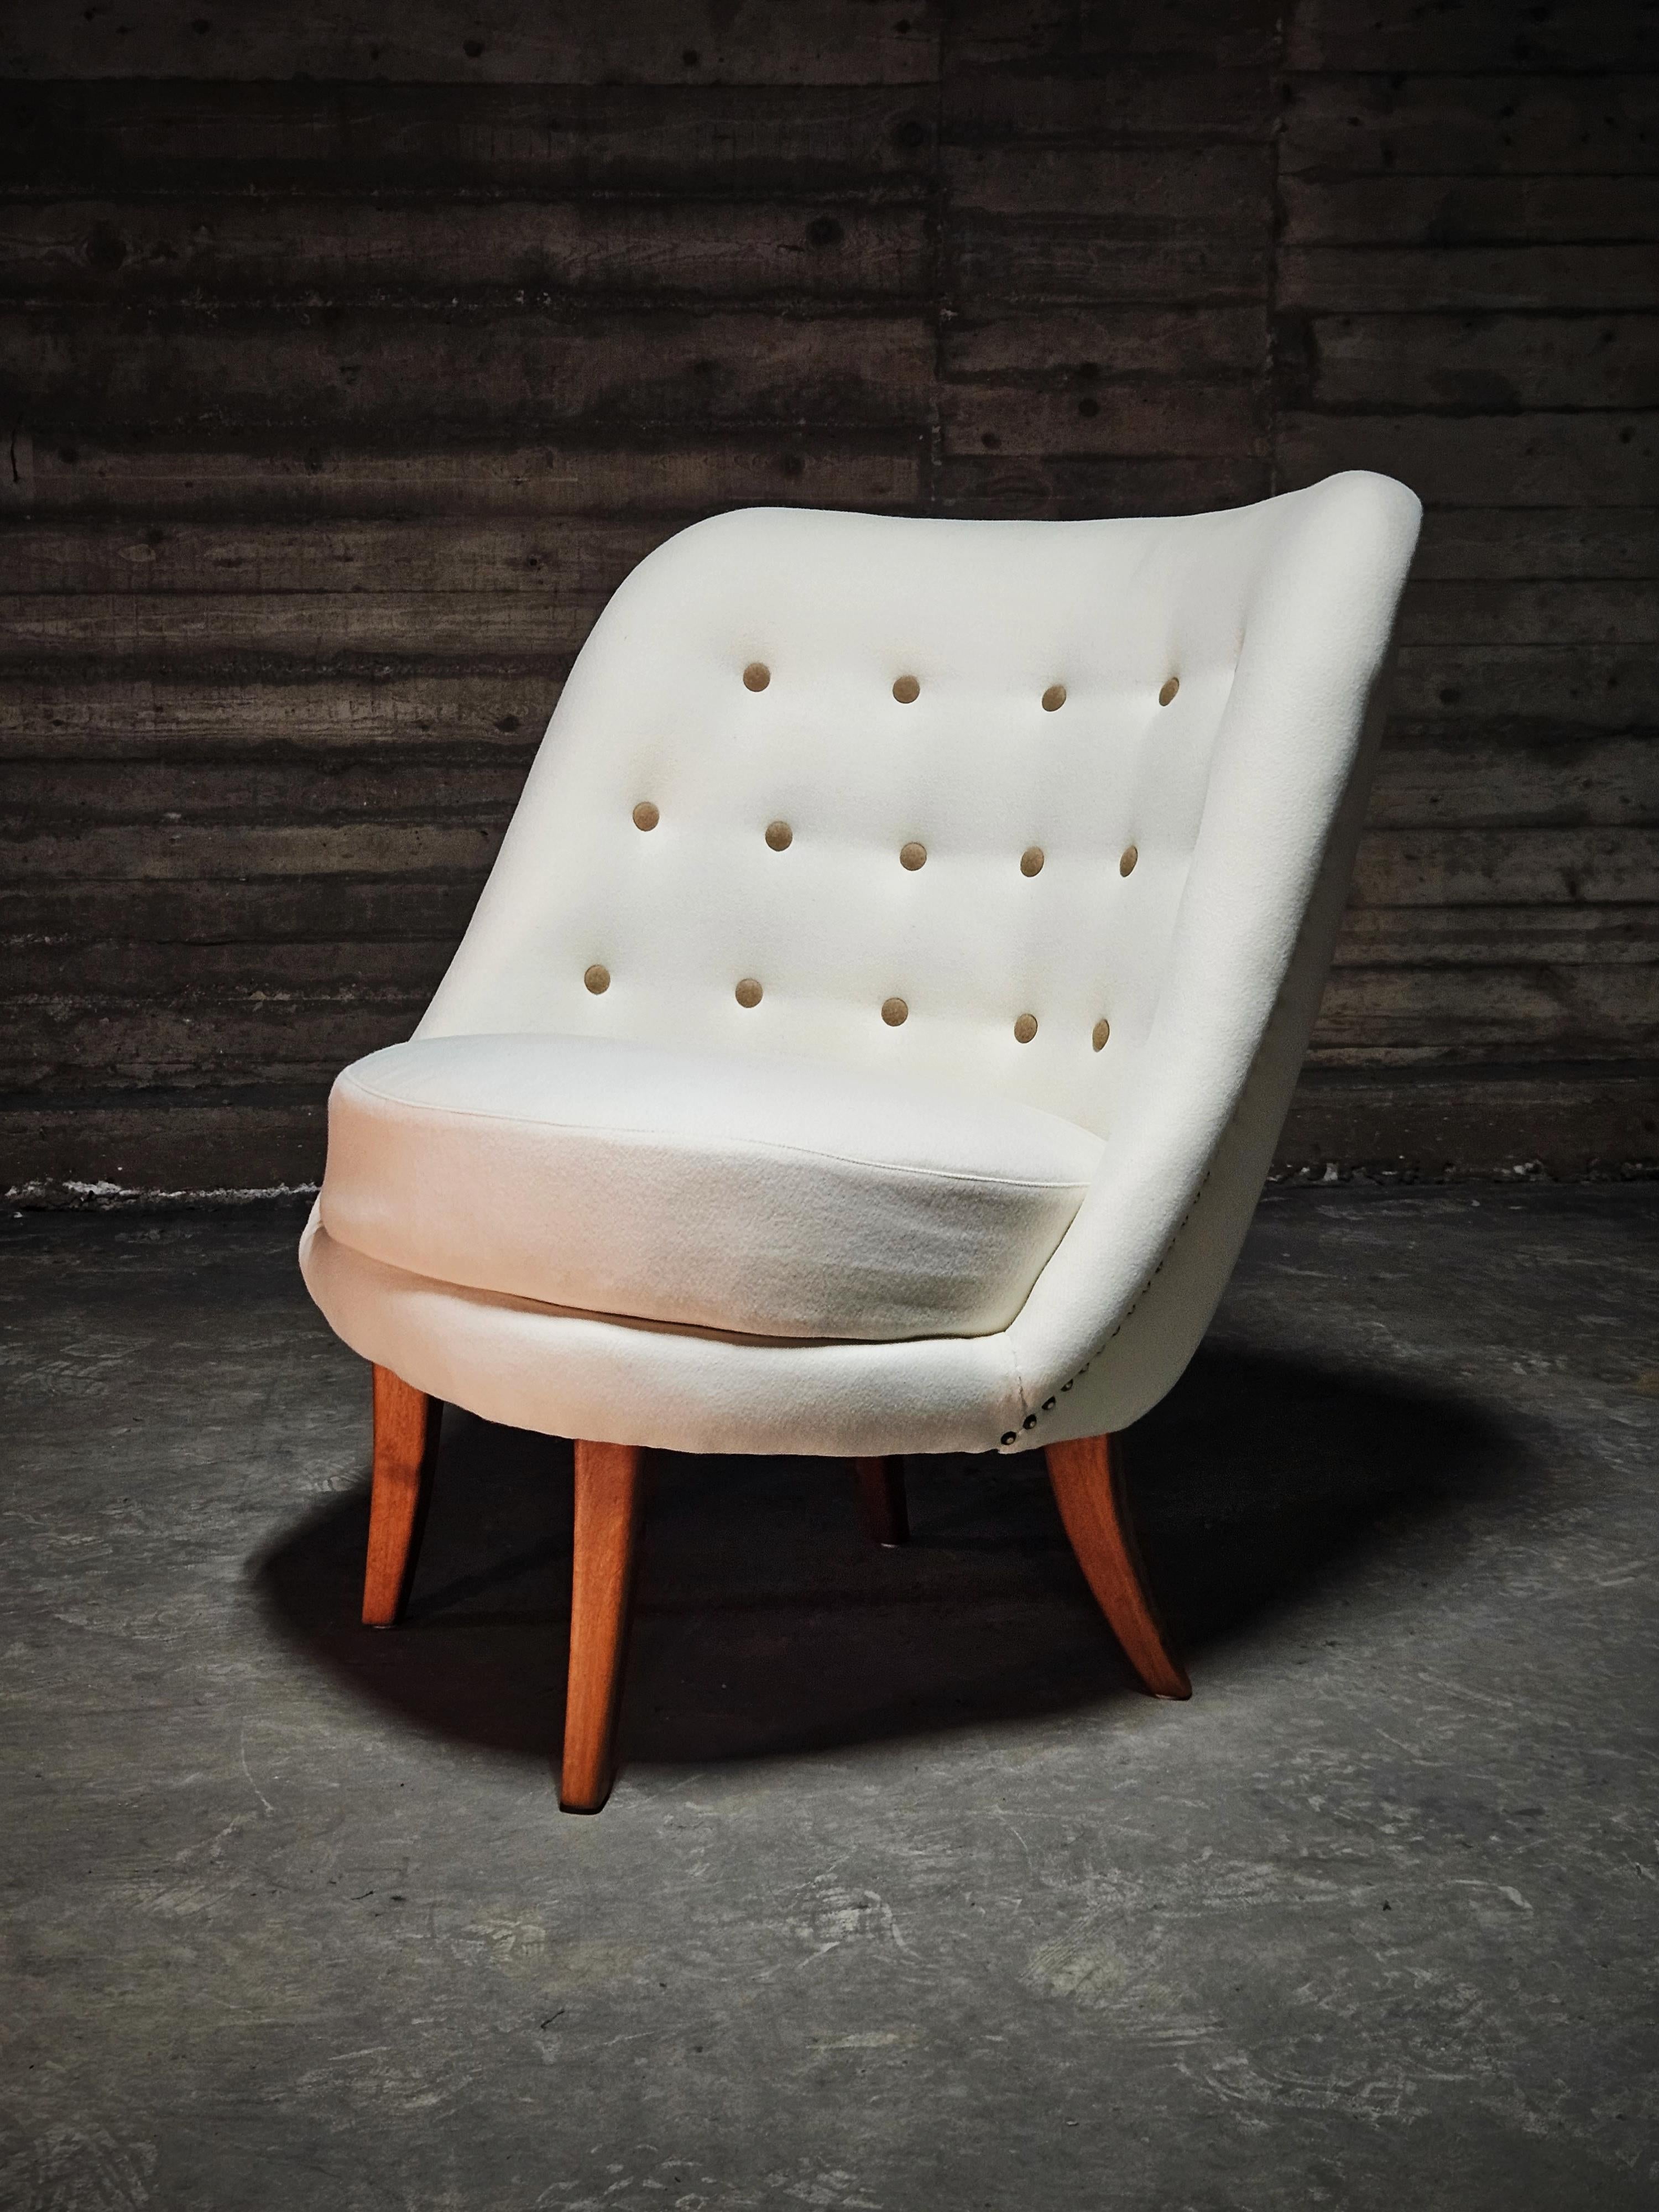 A Scandinavian modern asymmetrical lounge chair, designed by Arne Norell in the 1950s. 

Re-upholstered with high quality white wool with brown wool buttons. 